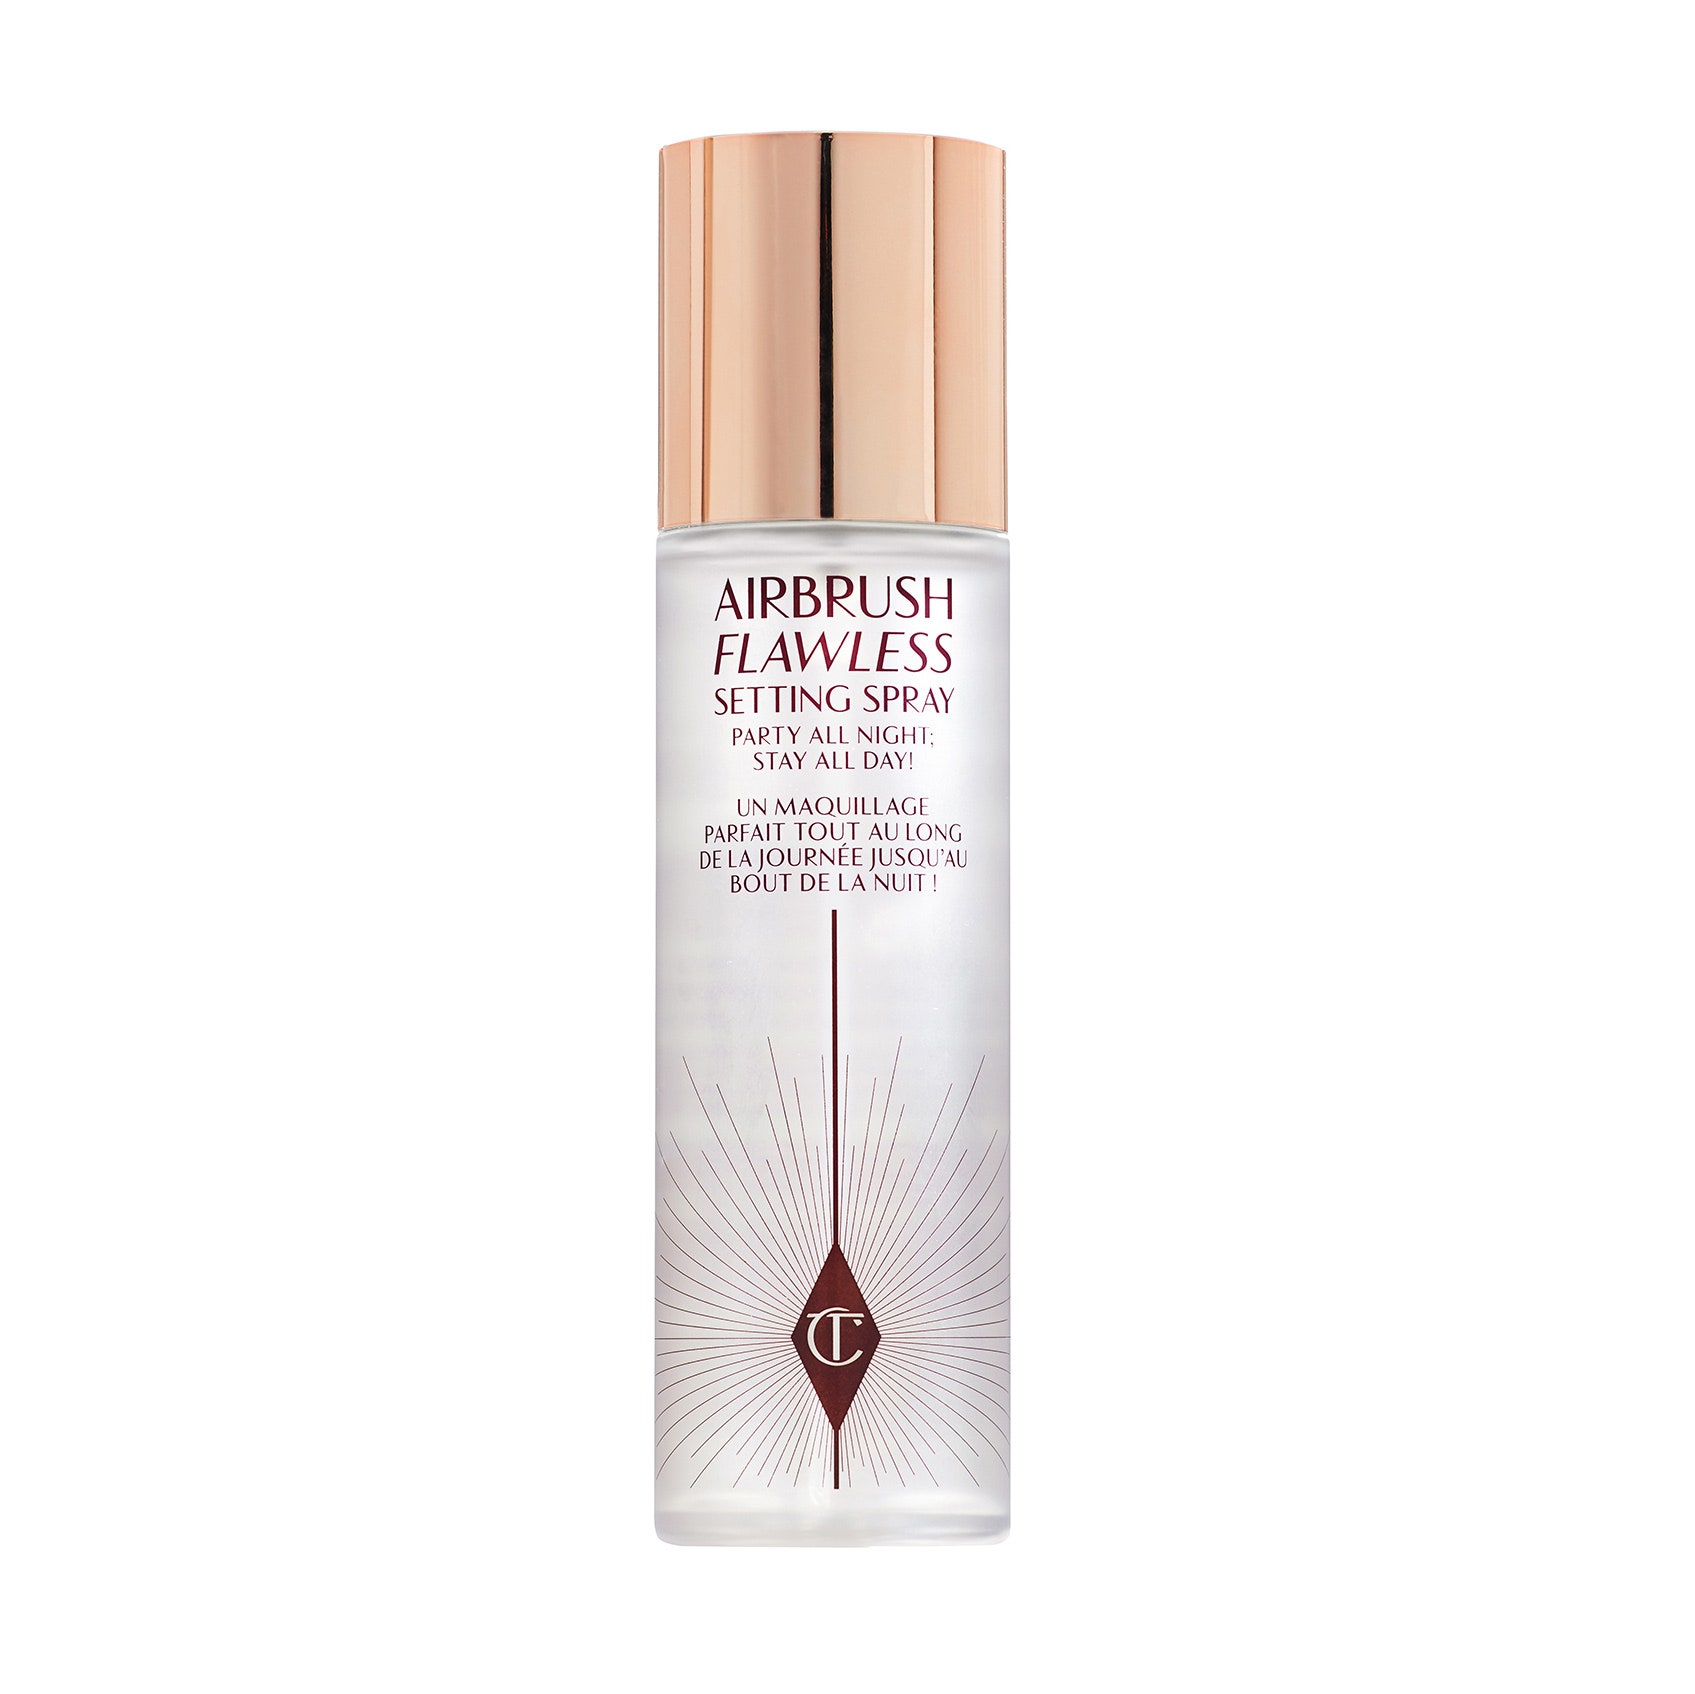 Charlotte Tilbury's Airbrush Flawless Setting Spray Keeps Makeup Off Mask | Review